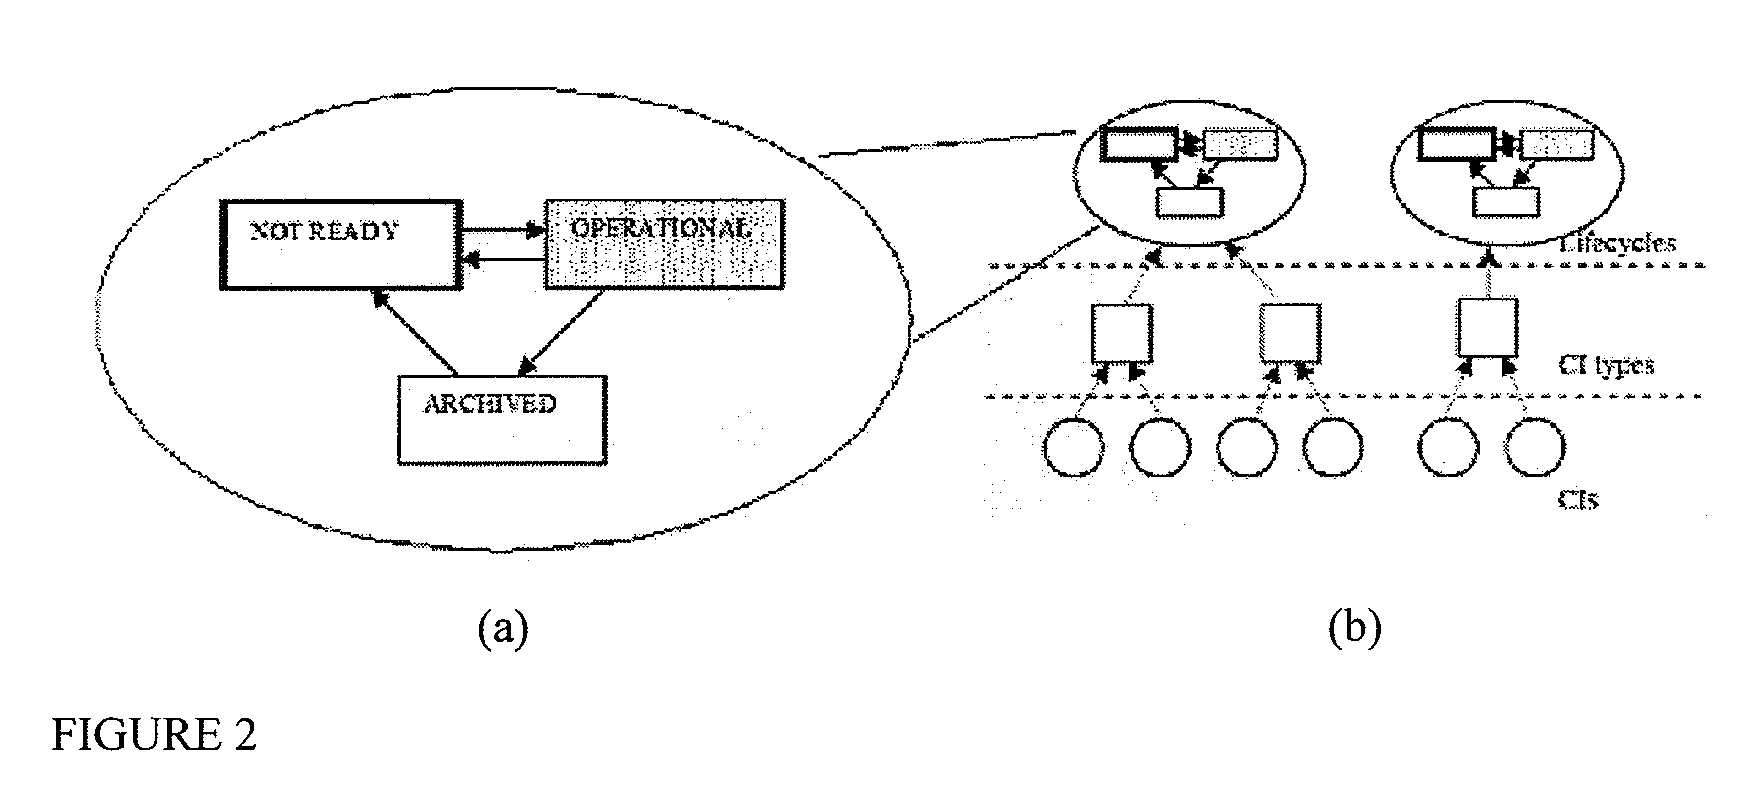 System and Method for Automated Configuration Control, Audit Verification and Process Analytics